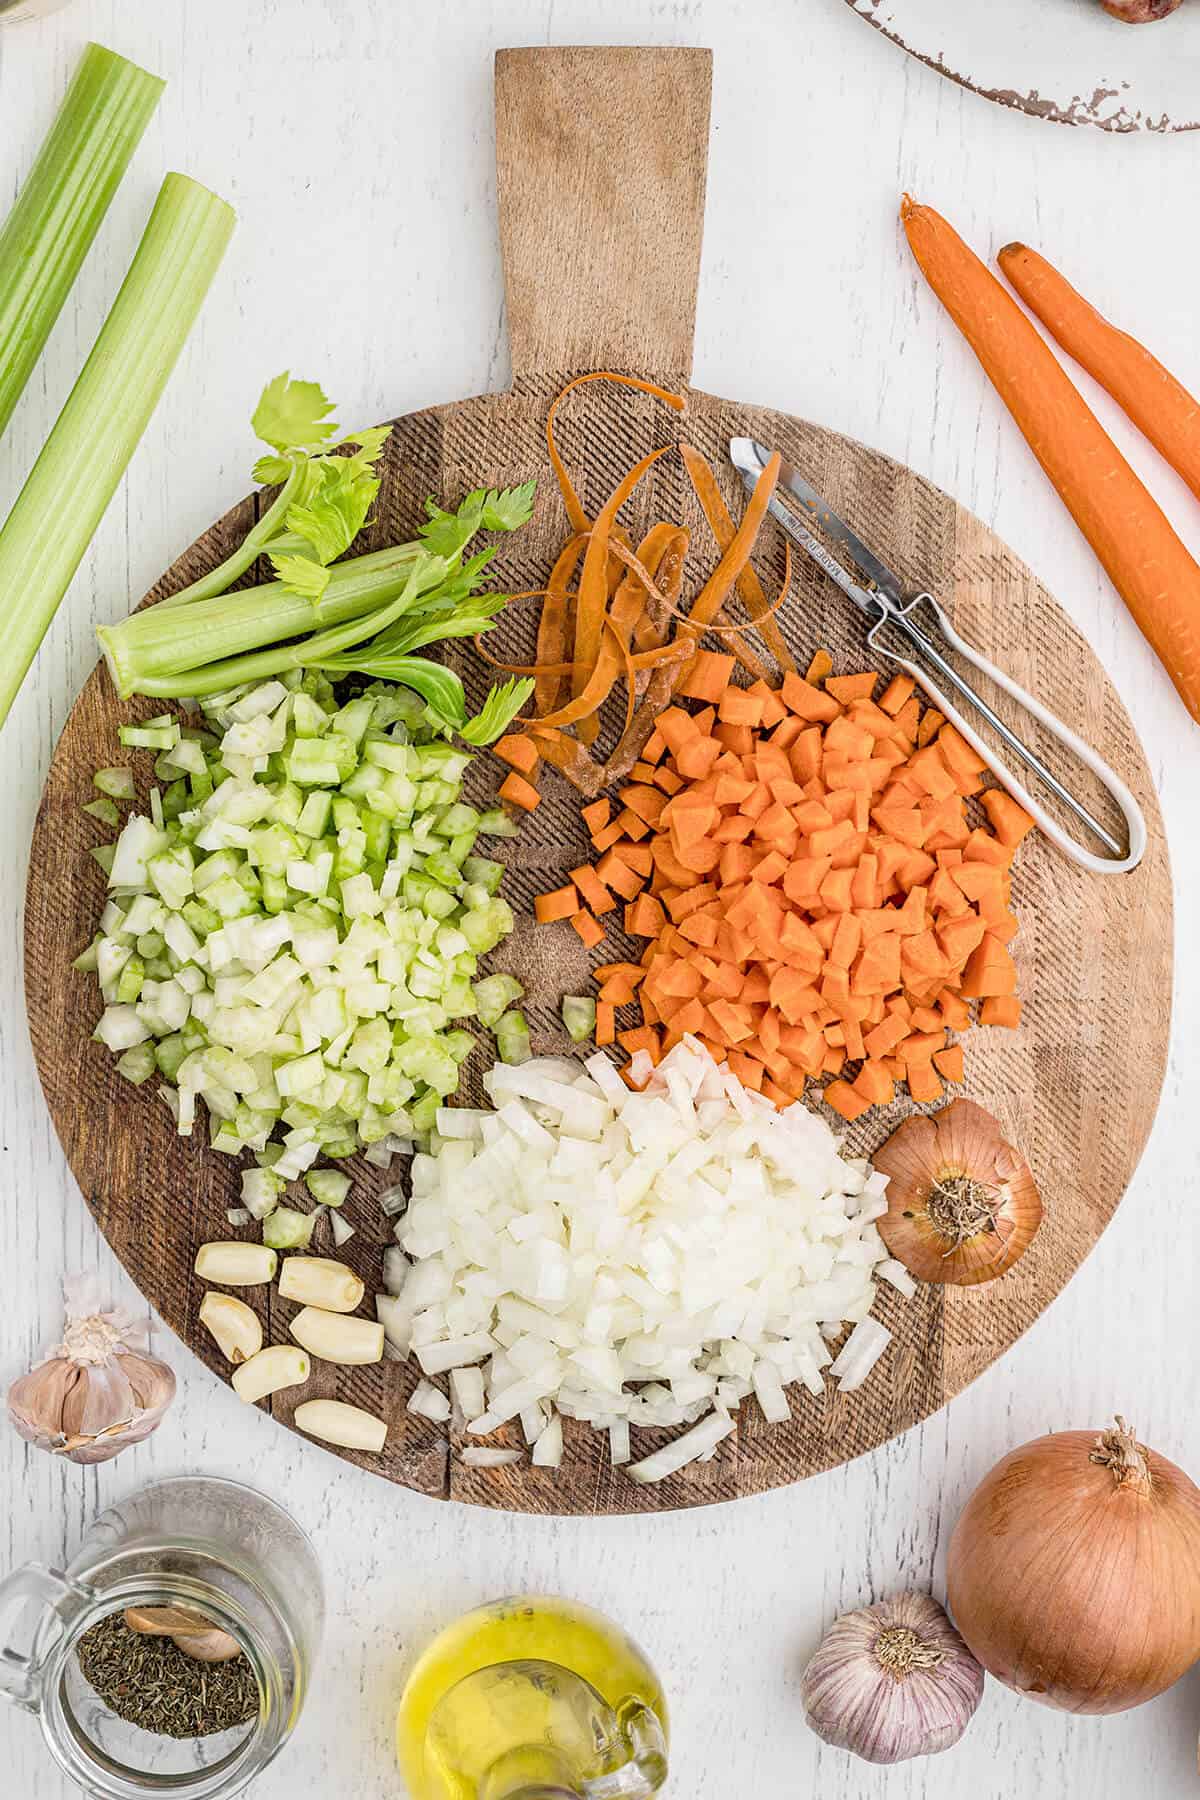 Diced celery, carrot, onion, and garlic on a wooden board.